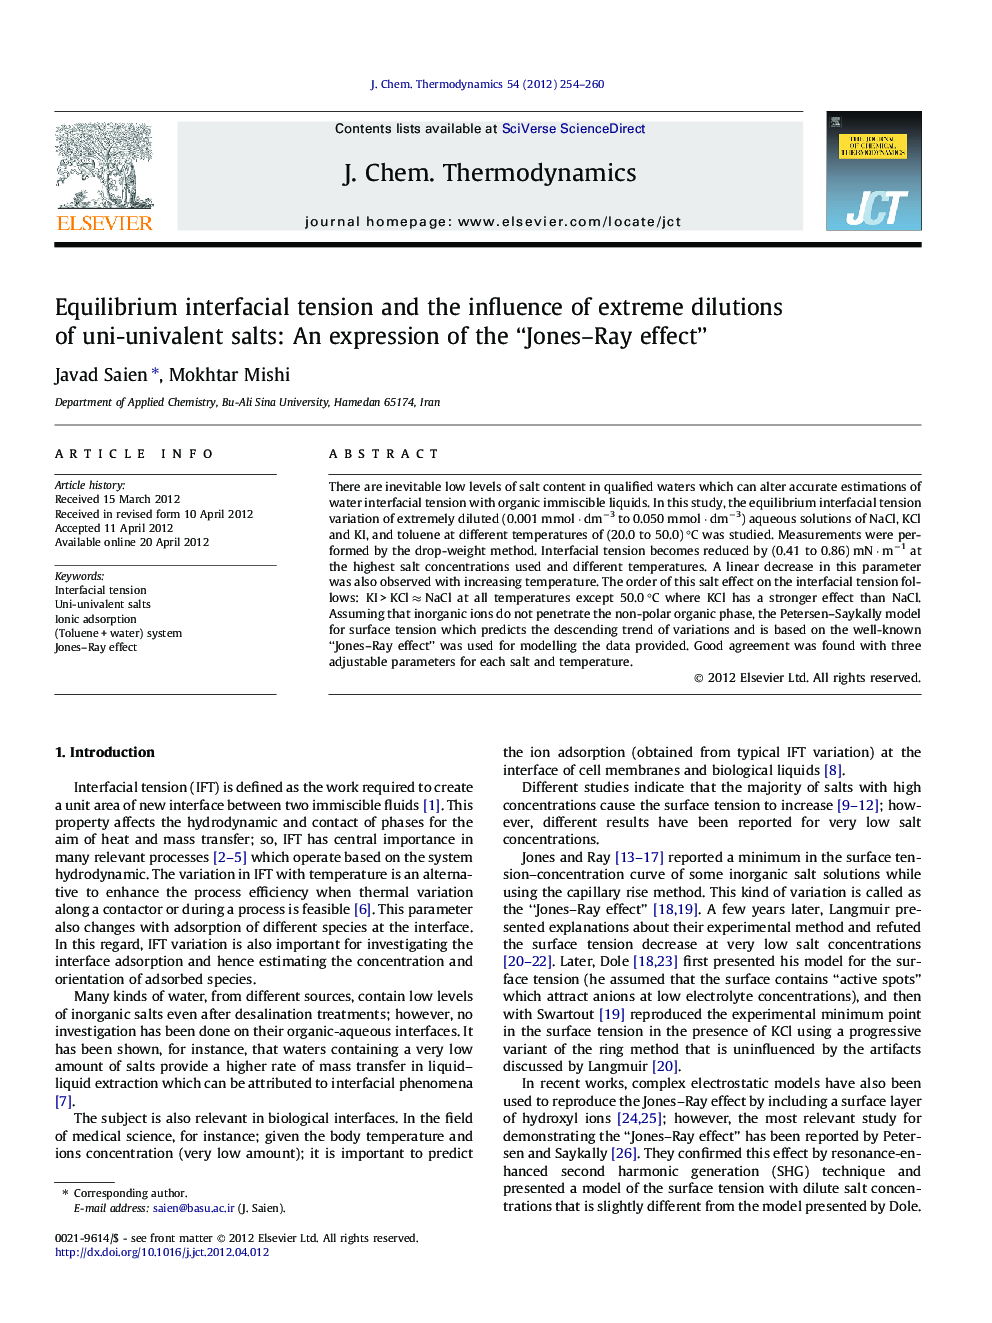 Equilibrium interfacial tension and the influence of extreme dilutions of uni-univalent salts: An expression of the “Jones–Ray effect”